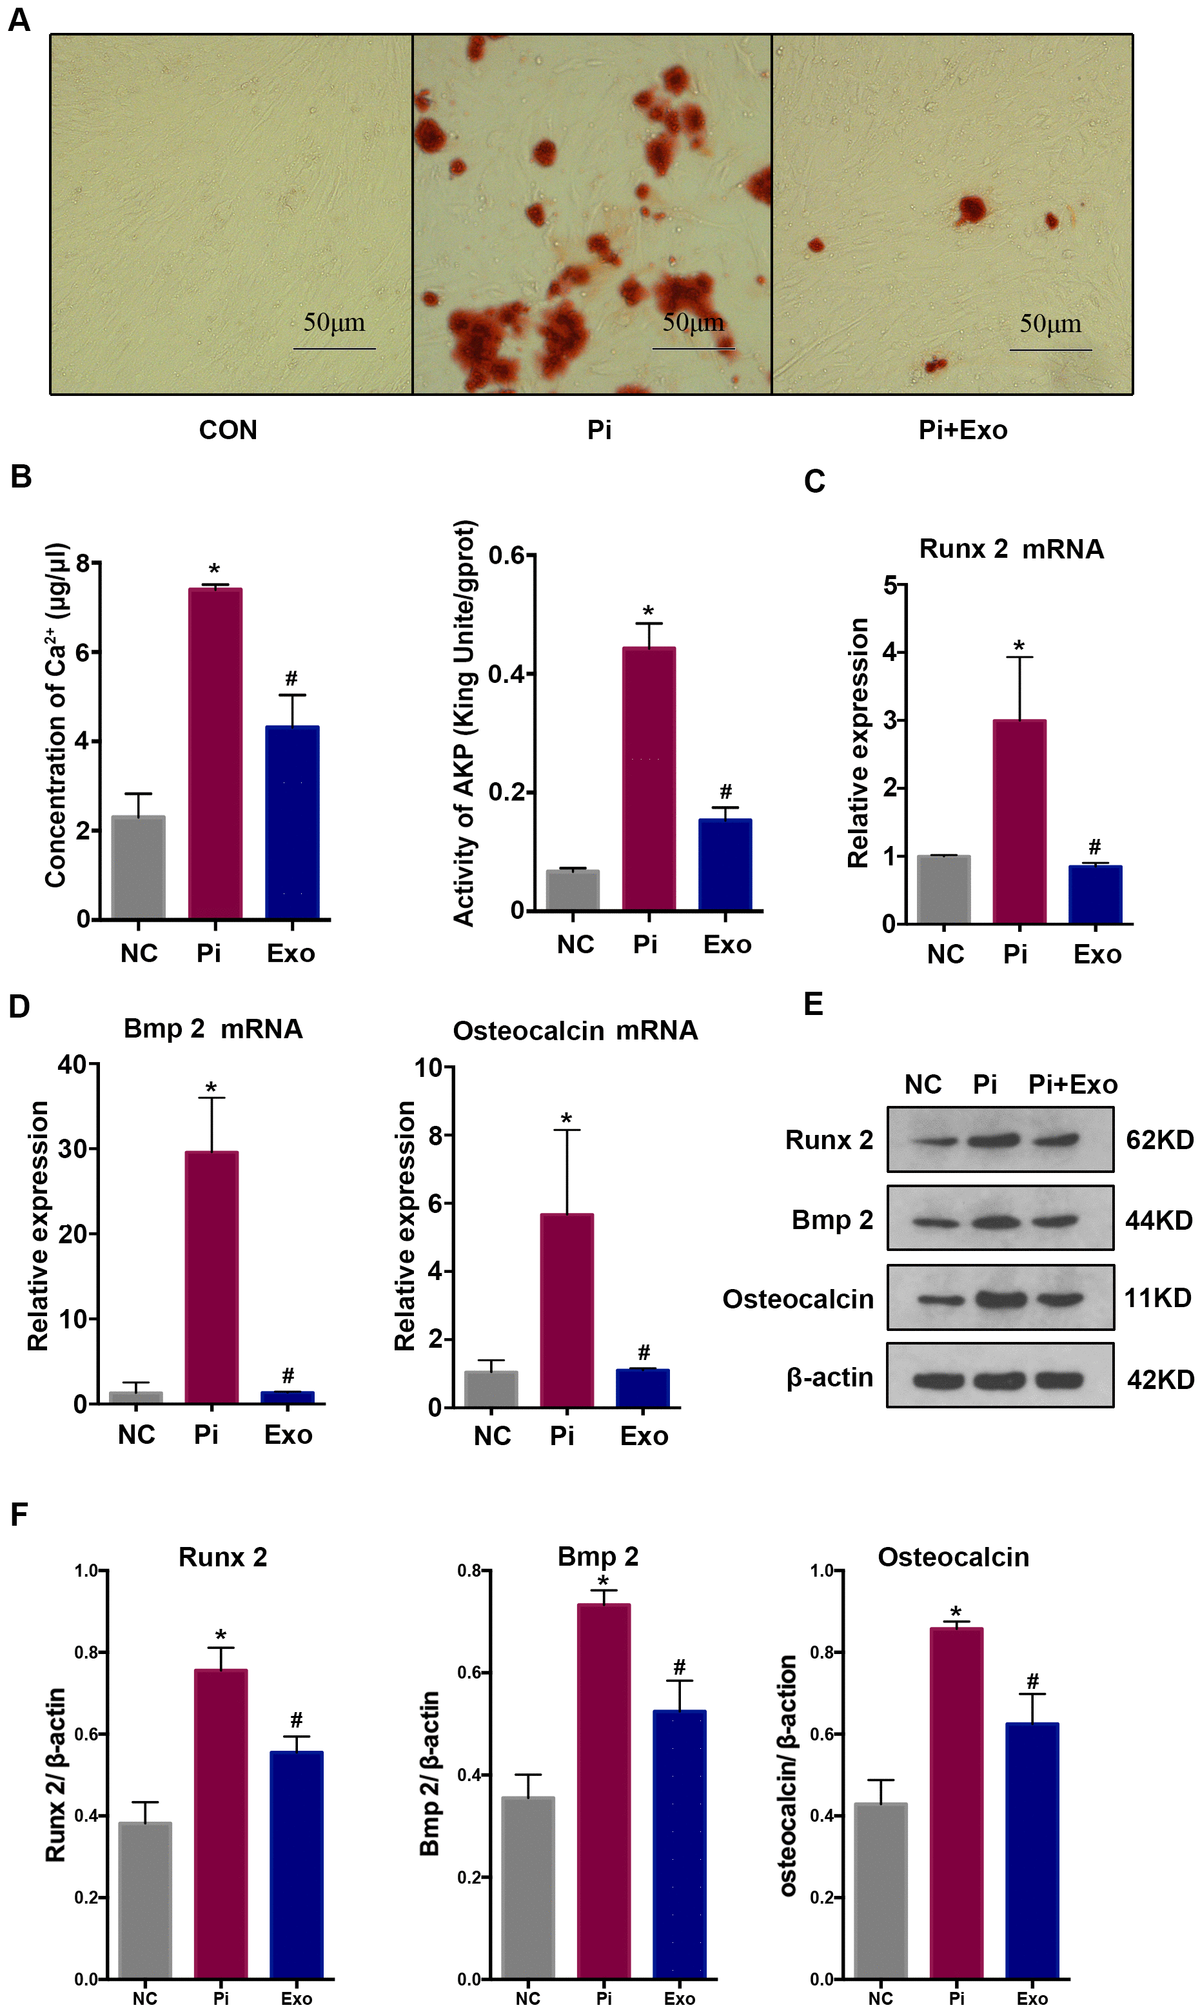 (A) Alizarin Red S staining showed mineral deposits in HA-VSMCs under different treatments. (B) Determination of the Ca2+ concentration and AKP activity in each group. (C, D) RT-qPCR analysis of mRNAs associated with osteogenic transdifferentiation. (E, F) Western blot analysis of protein expression. *P#P